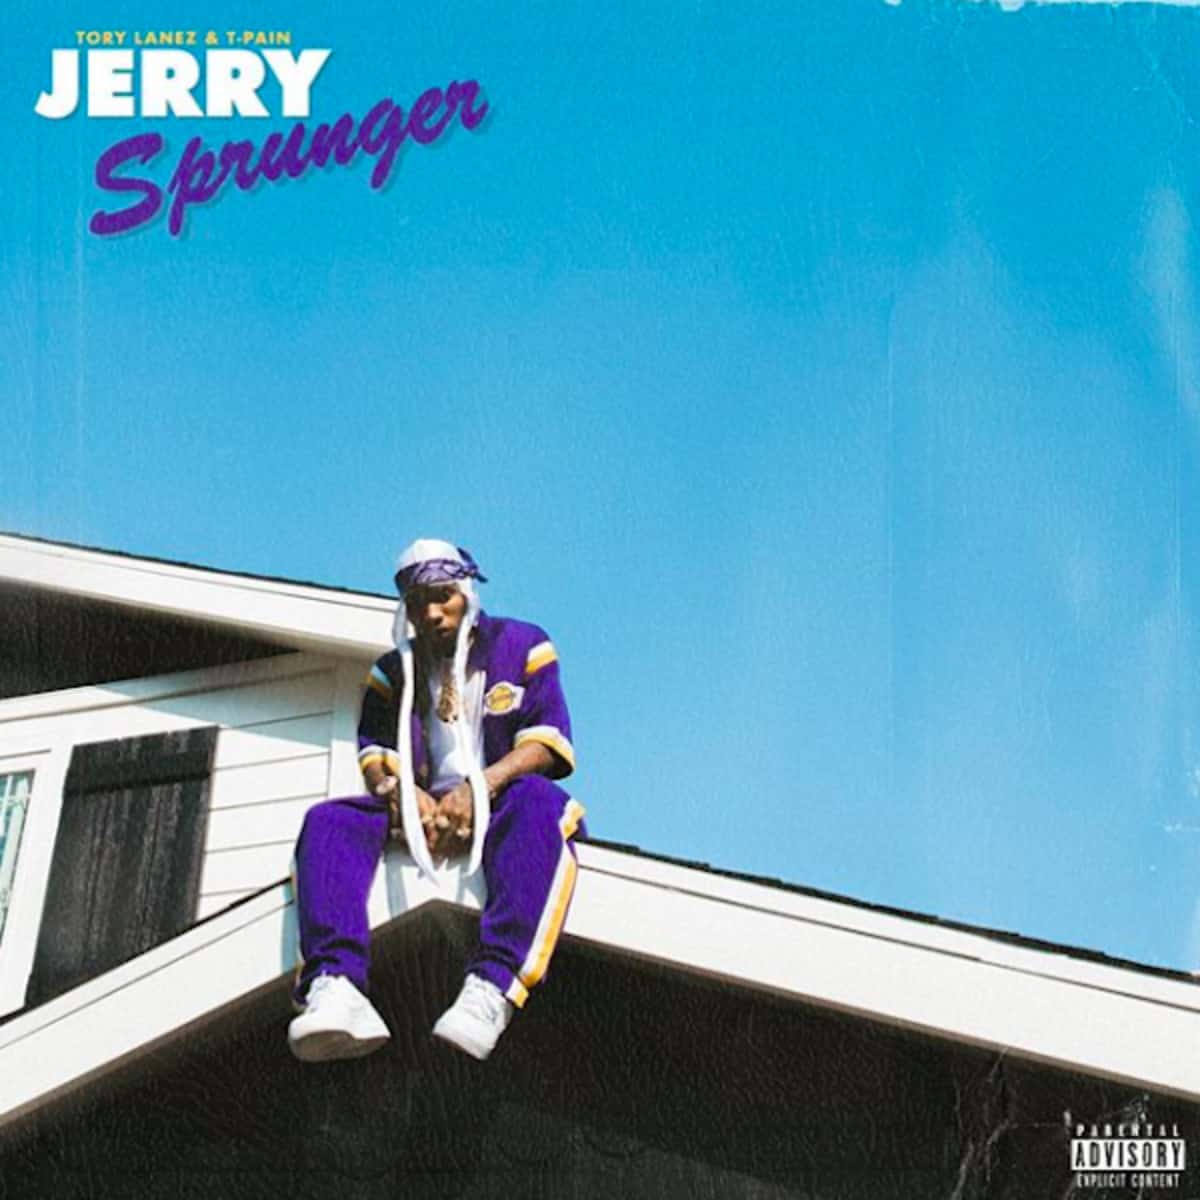 New Music Tory Lanez & T-Pain - Jerry Sprunger